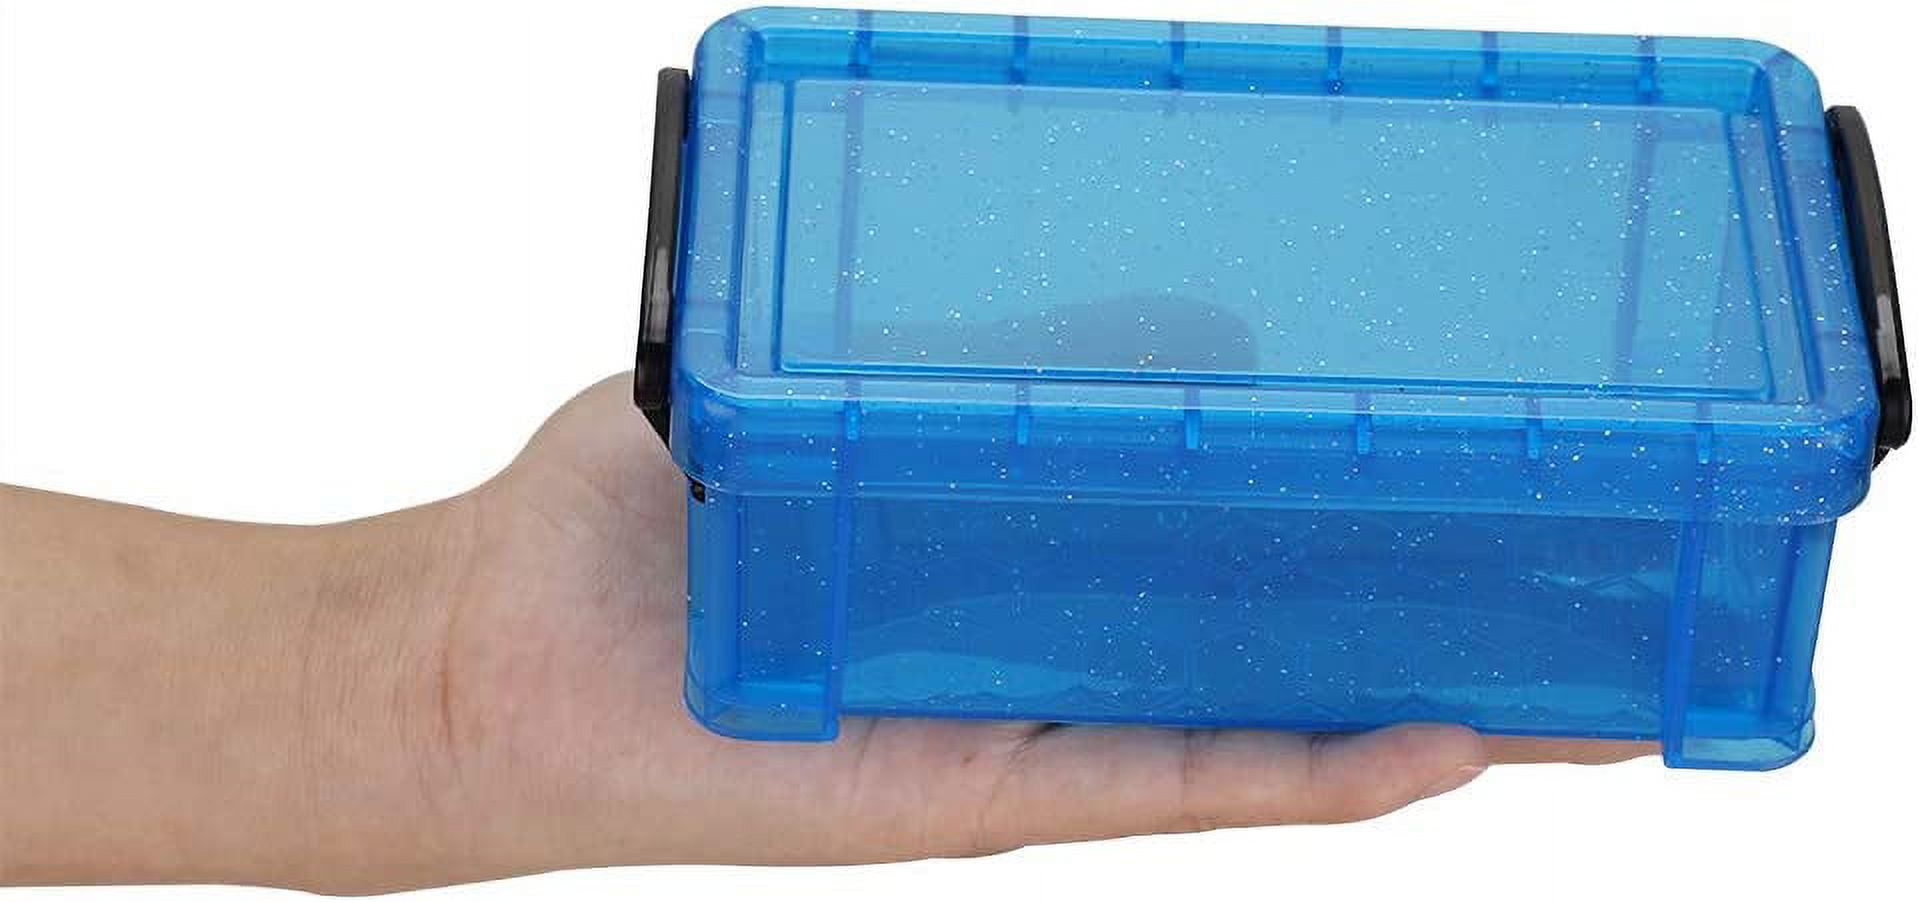 Rcybeo 16 Pcs Mini Plastic Containers Boxes with Lids, 4.5x3.4 Inches Clear  Small Storage Box for Collecting Small Items, Beads, Jewelry, Crafts